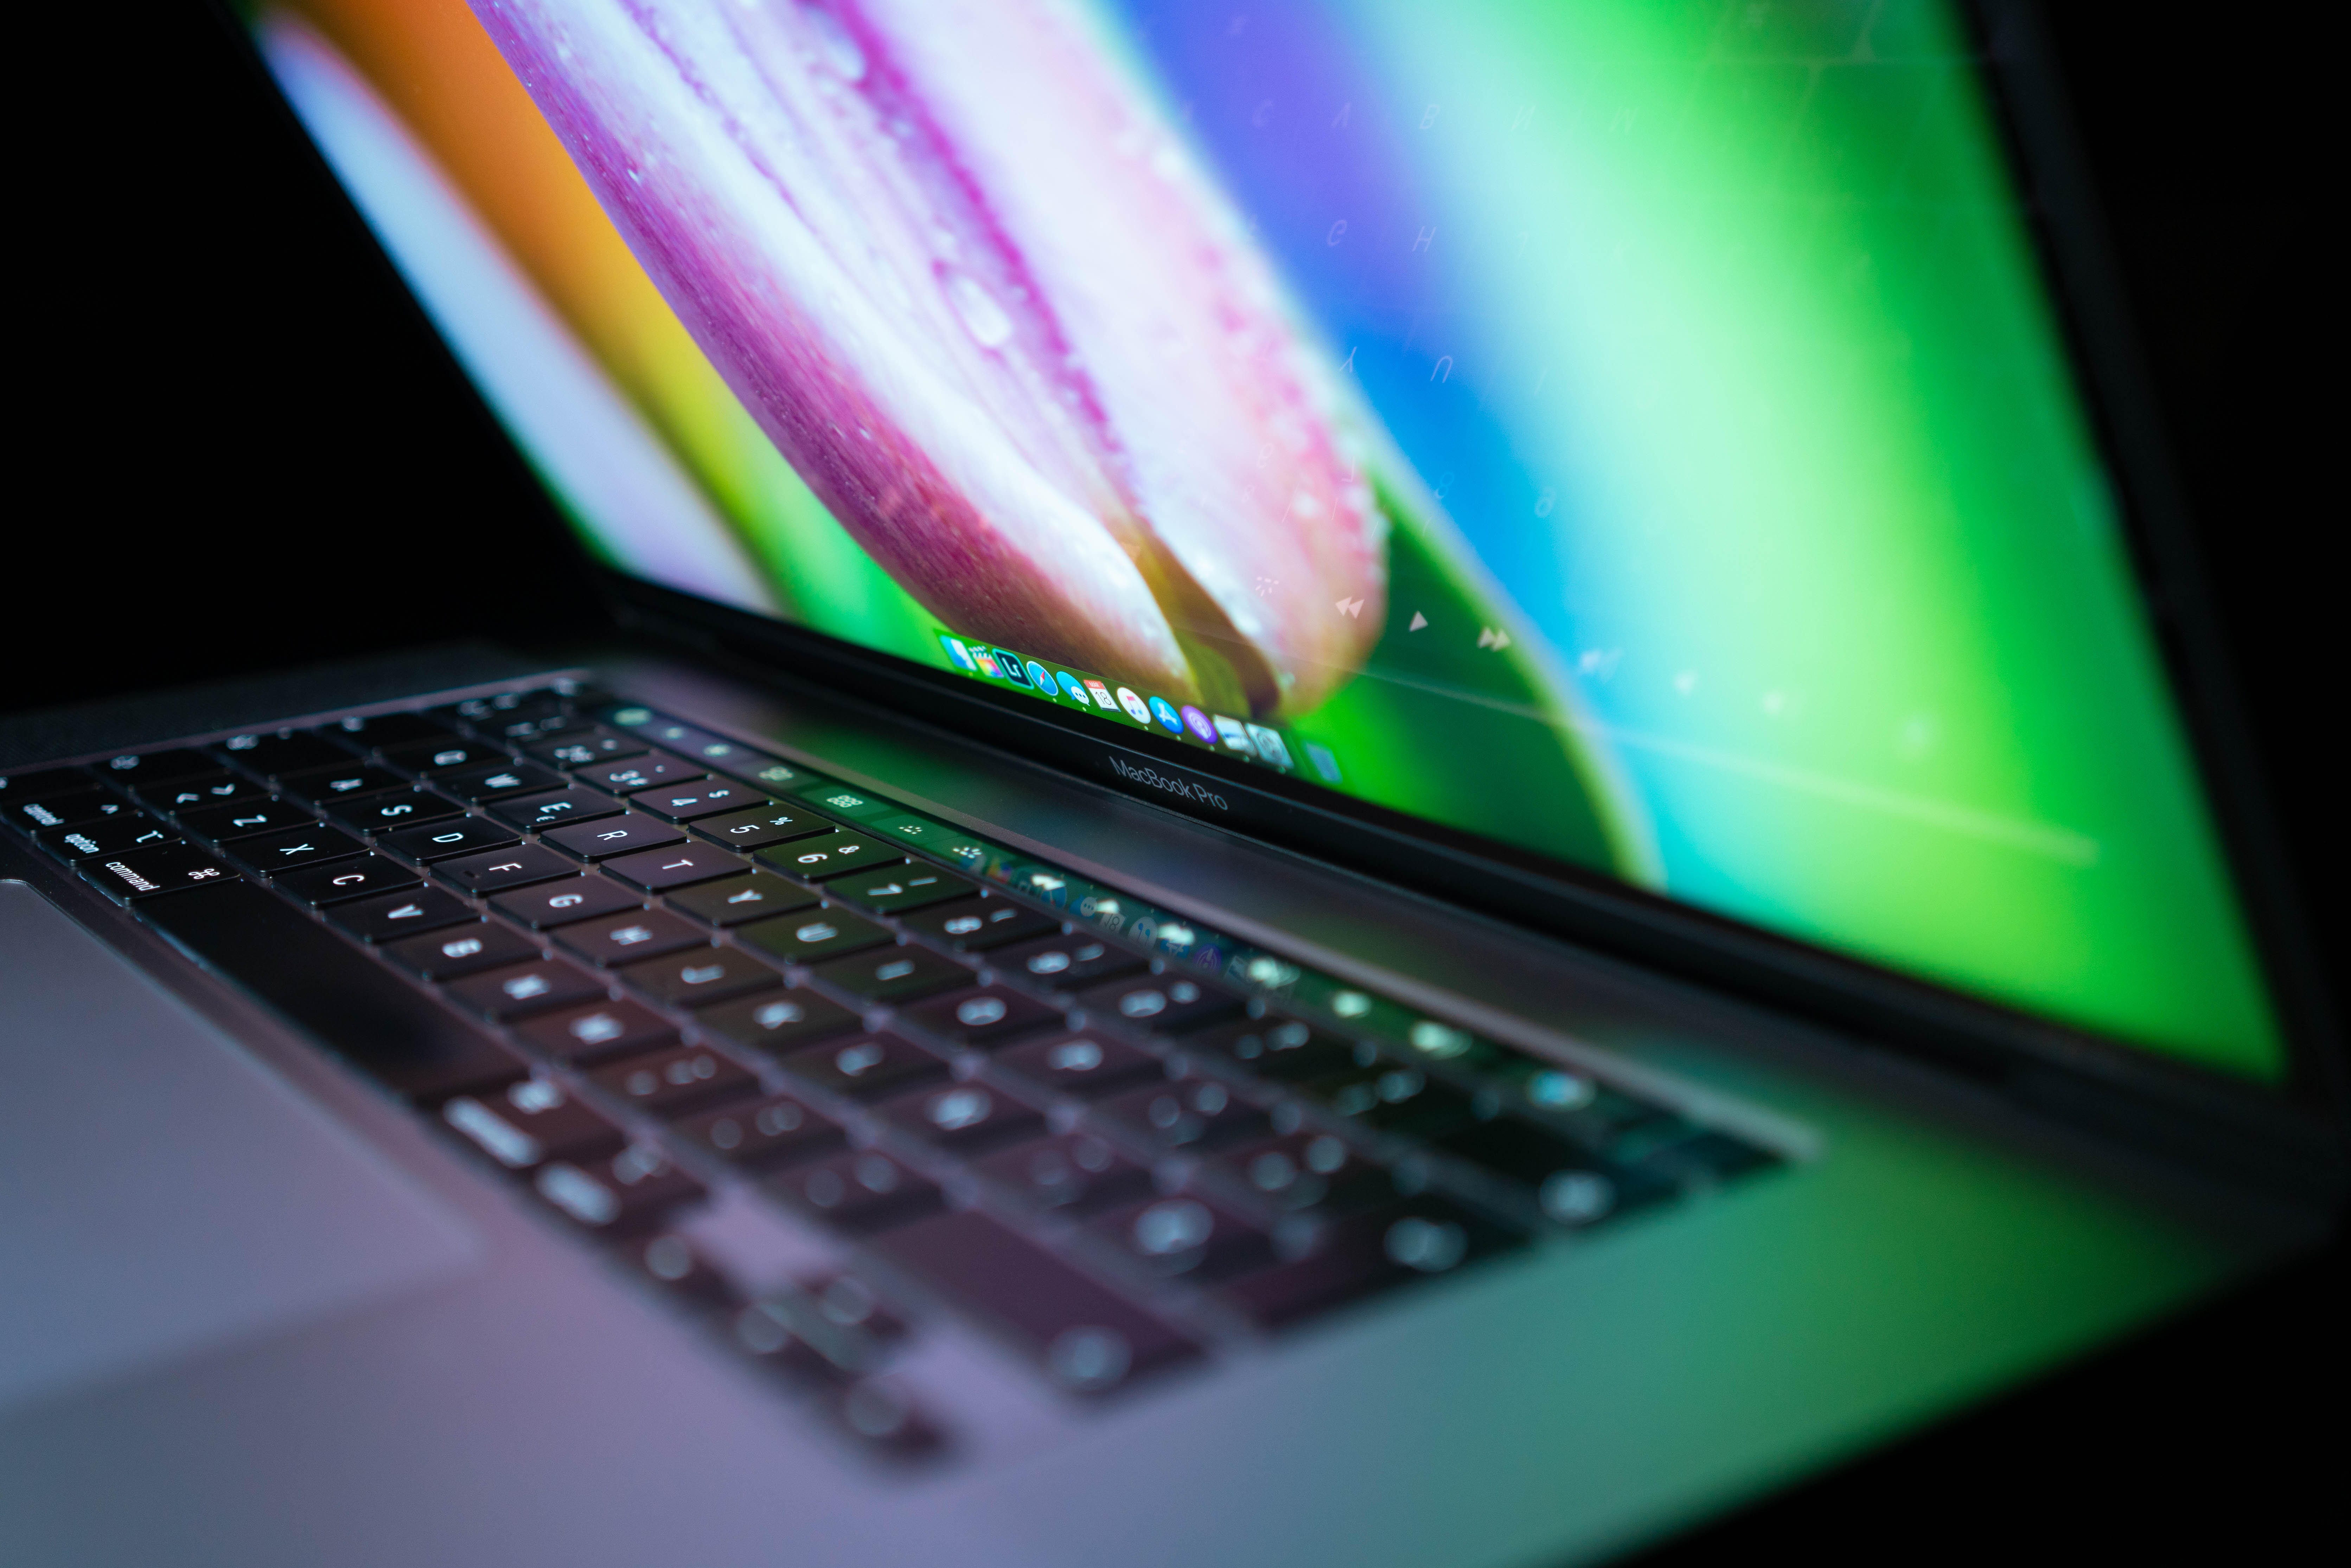 10 simple ways to improve your MacBook’s battery life